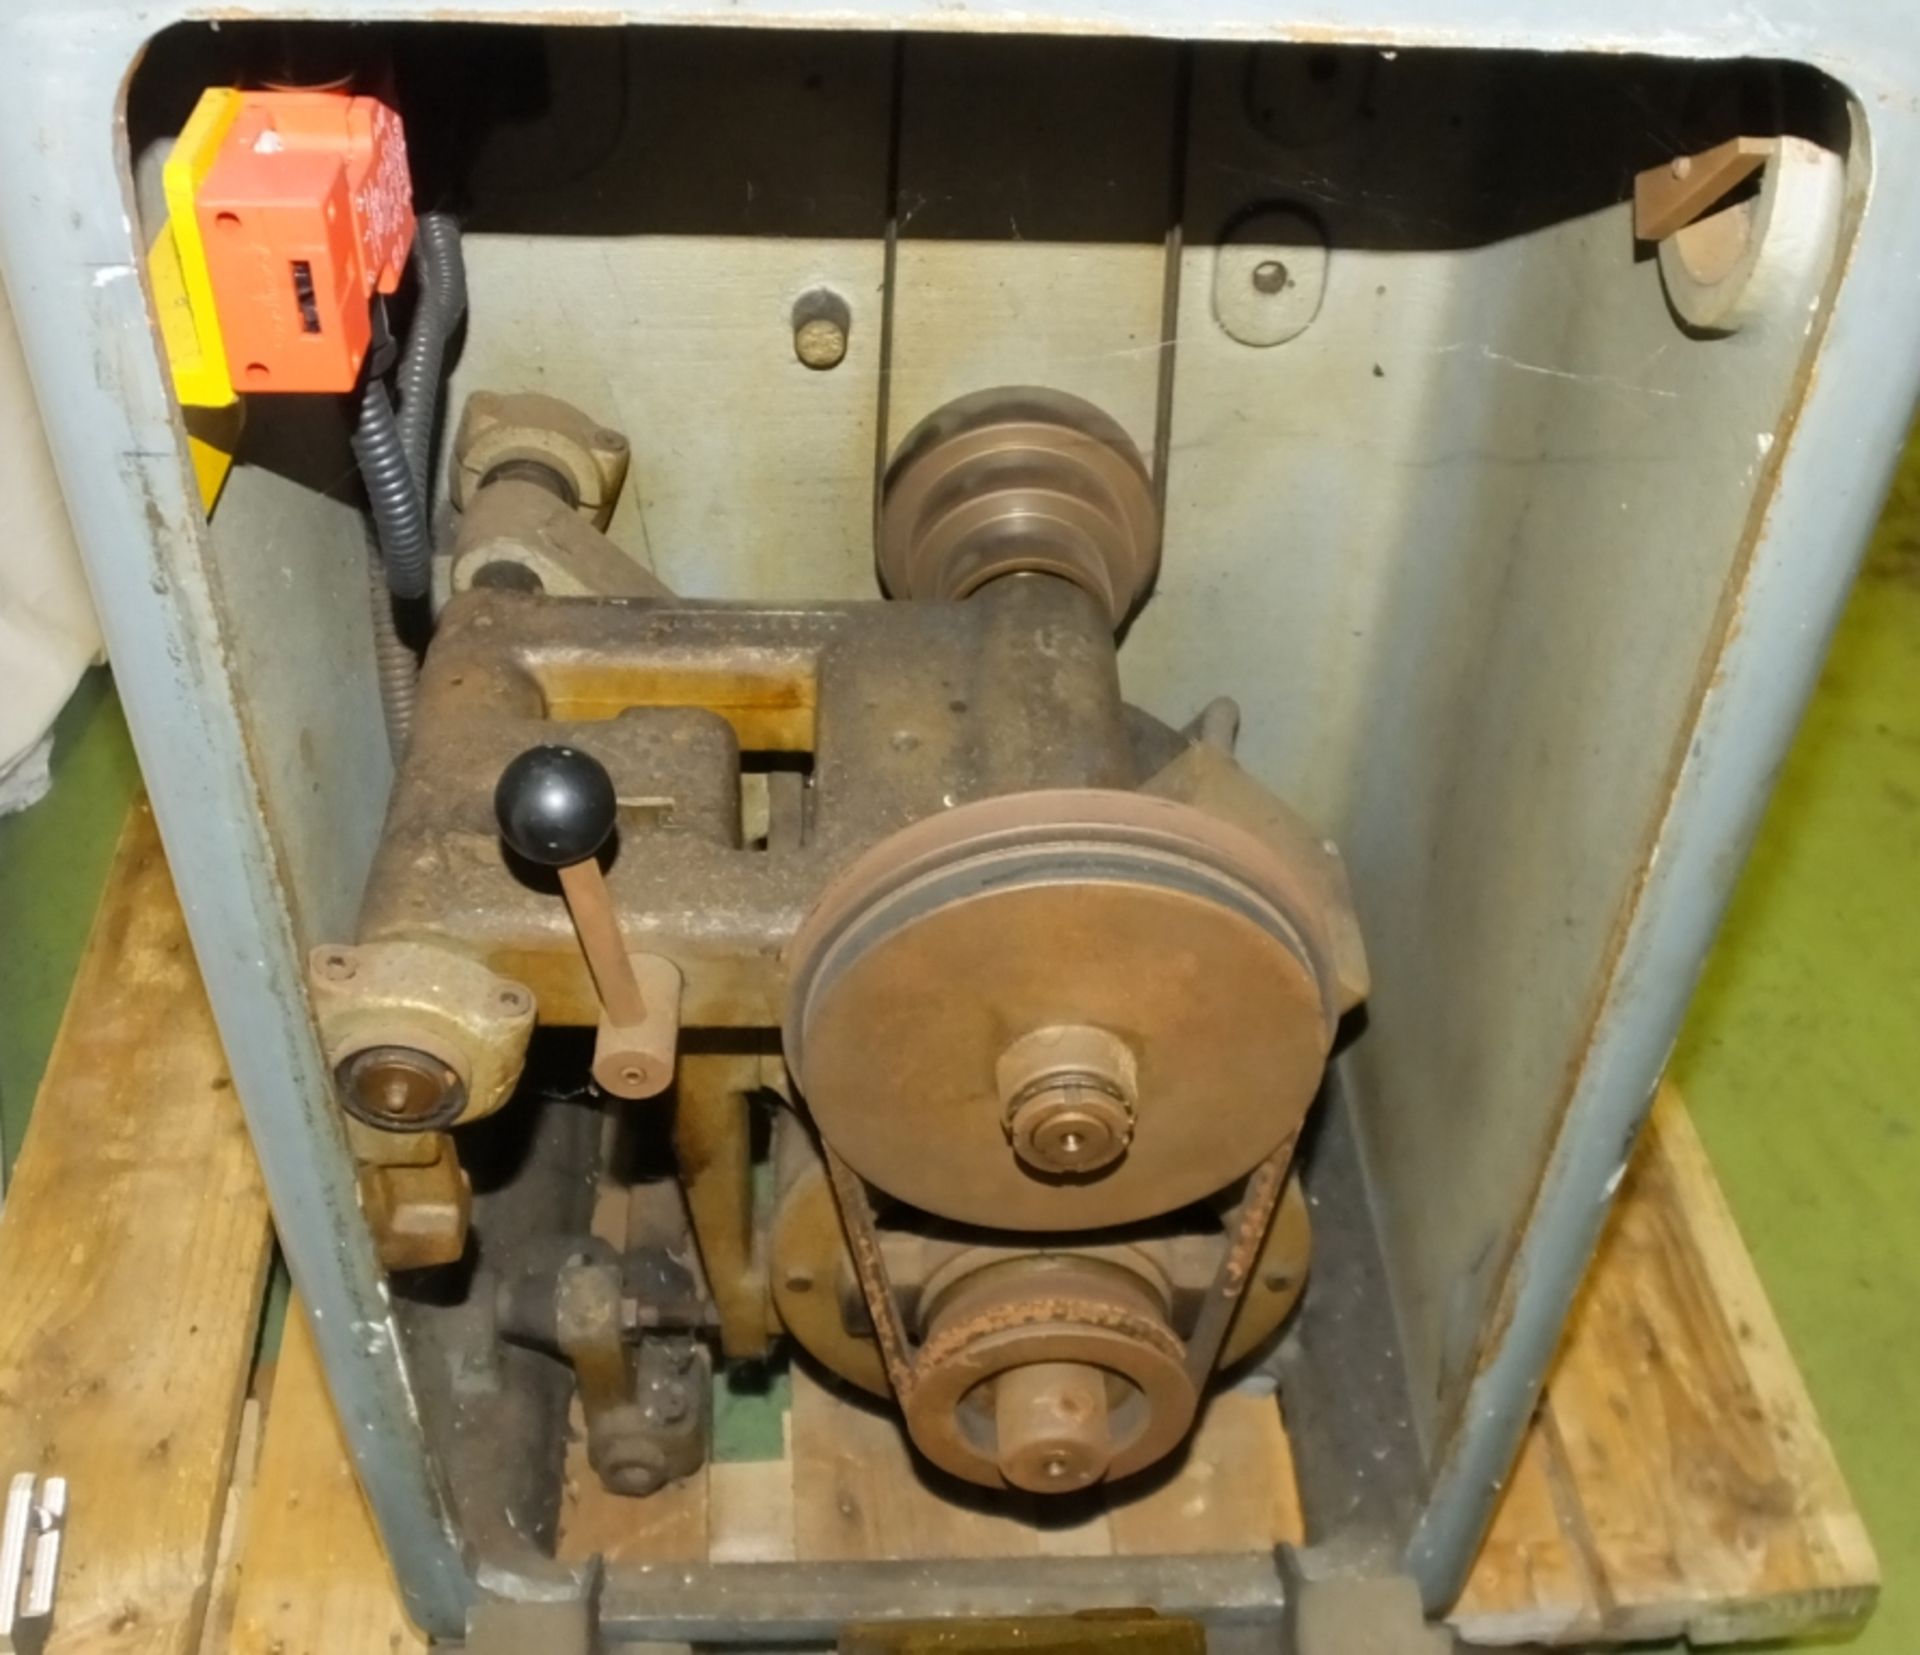 Schaublin S.A. Lathe Type 102-80 - 420V - Serial 250358 - £10 Loading Charge Applied to th - Image 8 of 15